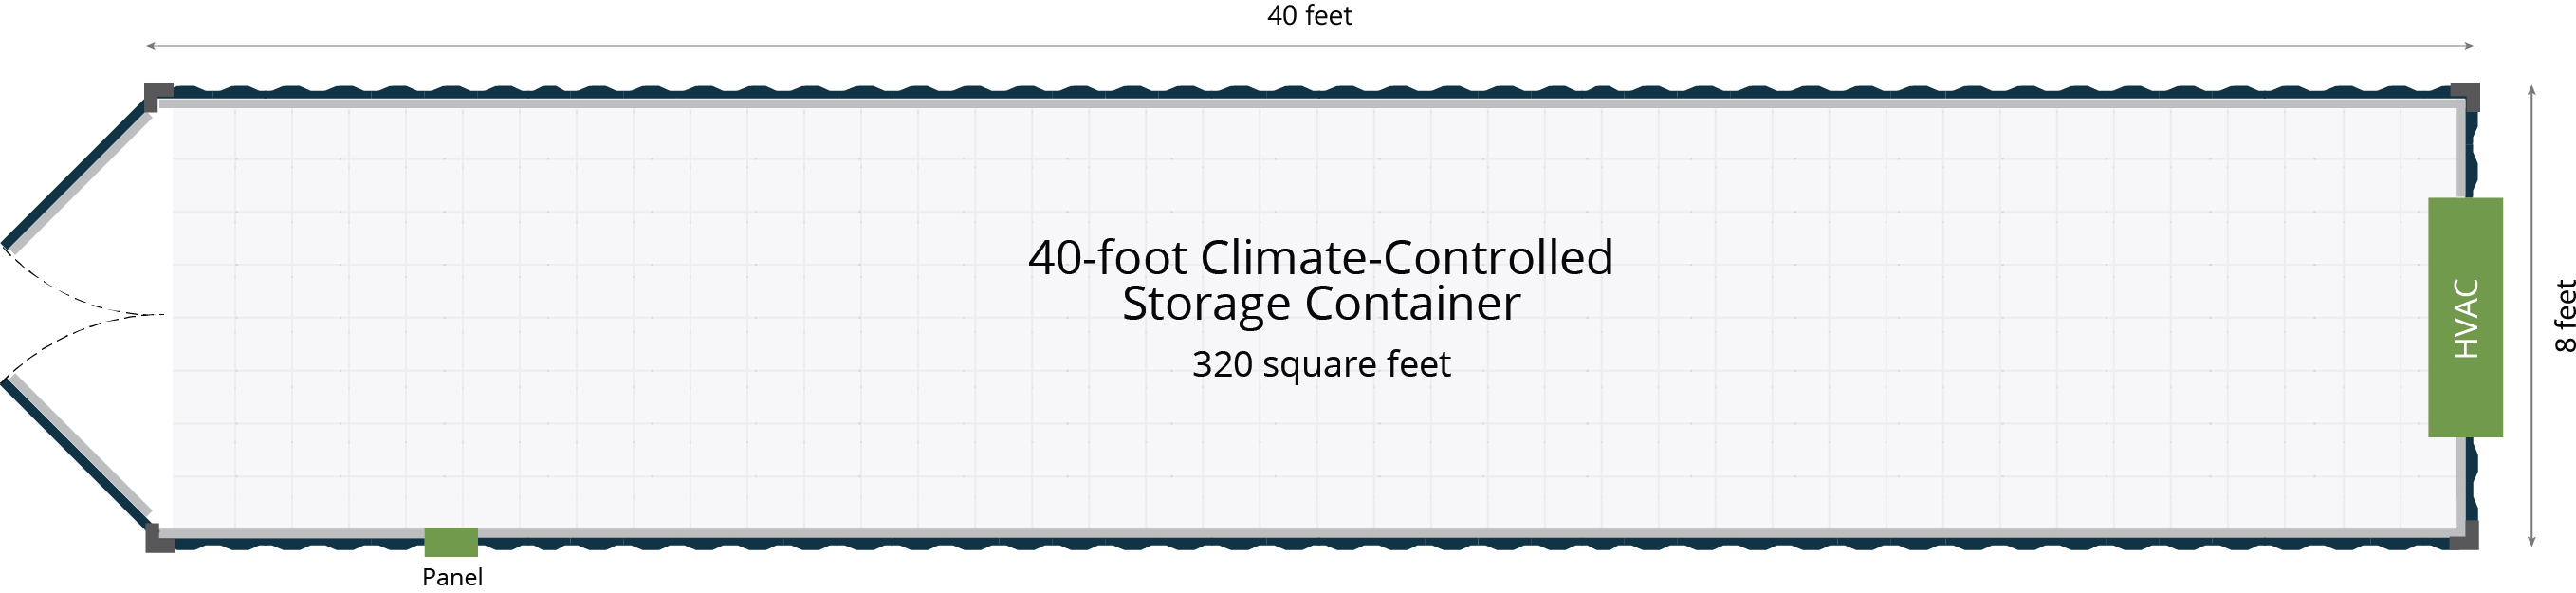 40-Foot Climate-Controlled Storage Container Floor Plan